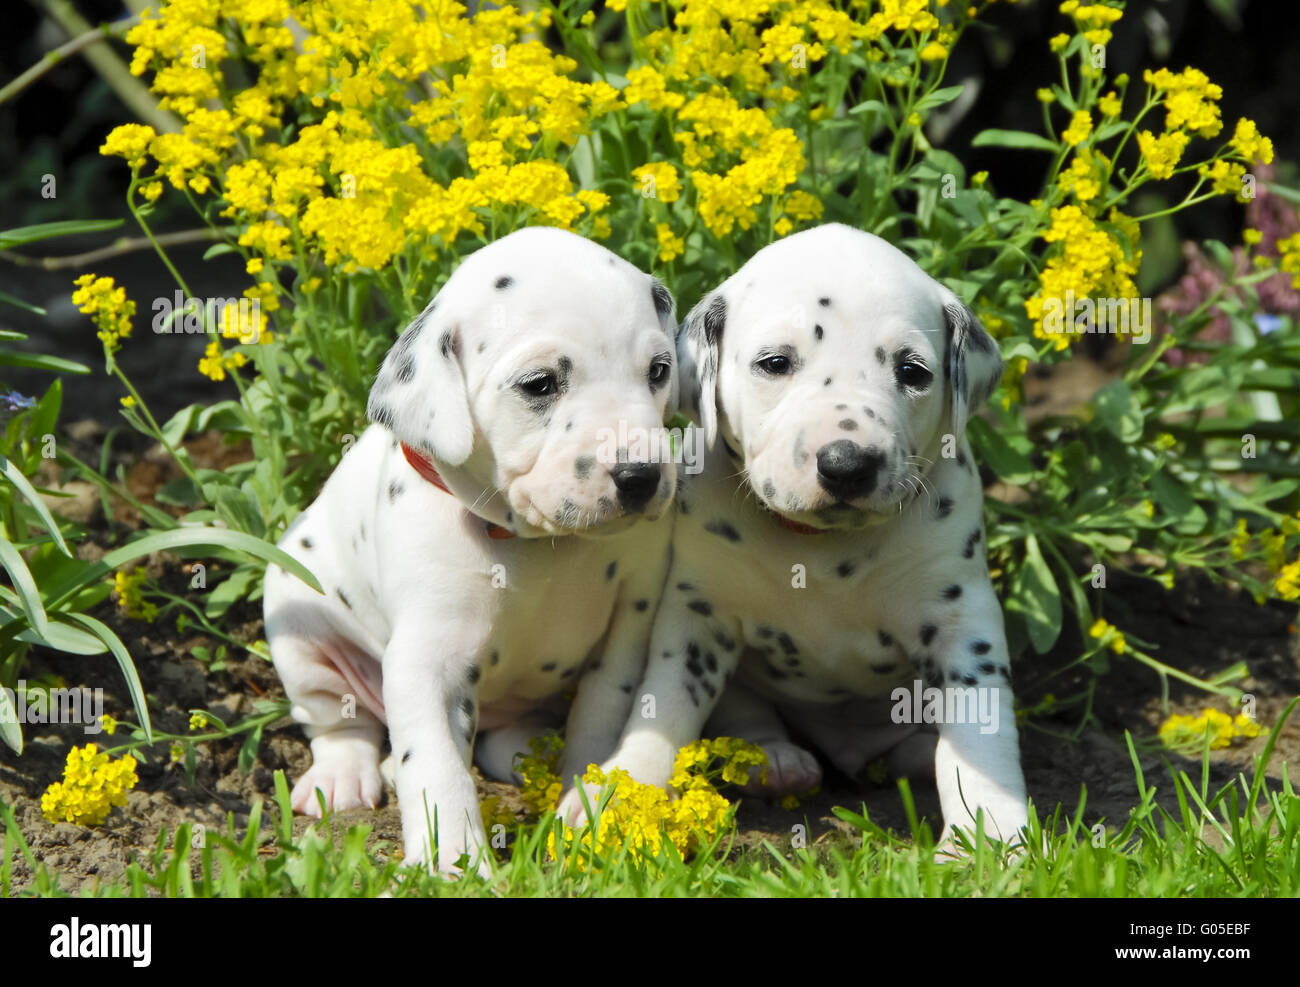 Two Dalmatian puppies three weeks old side by side Stock Photo